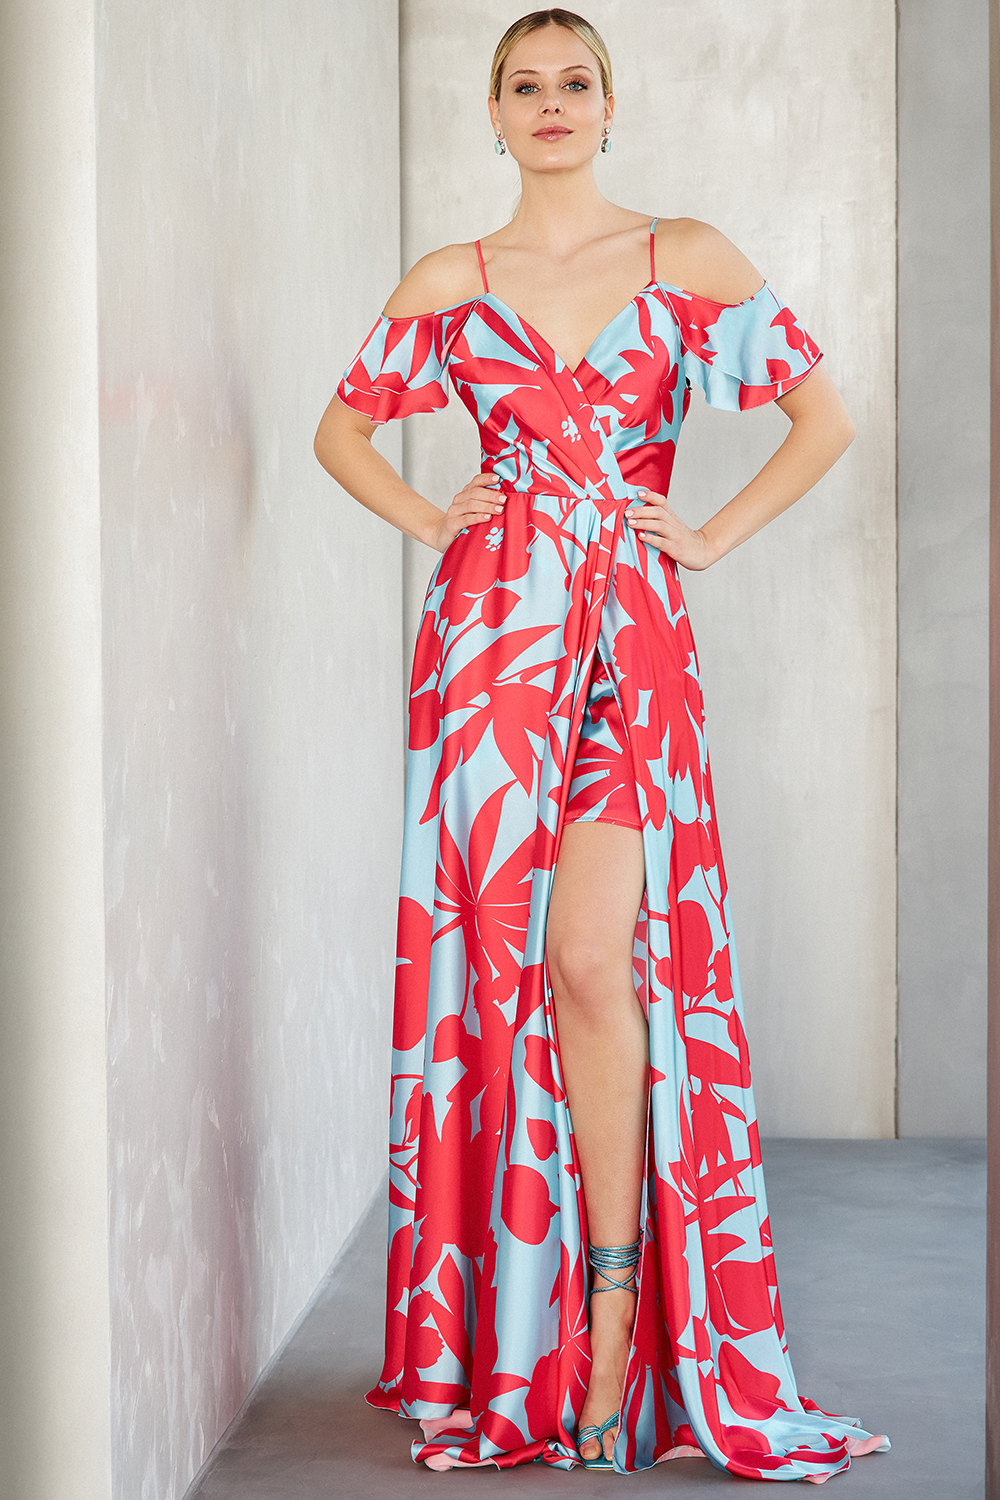 Cocktail Dresses / Long cocktail satin dress with printed fabric, open back and sleeves